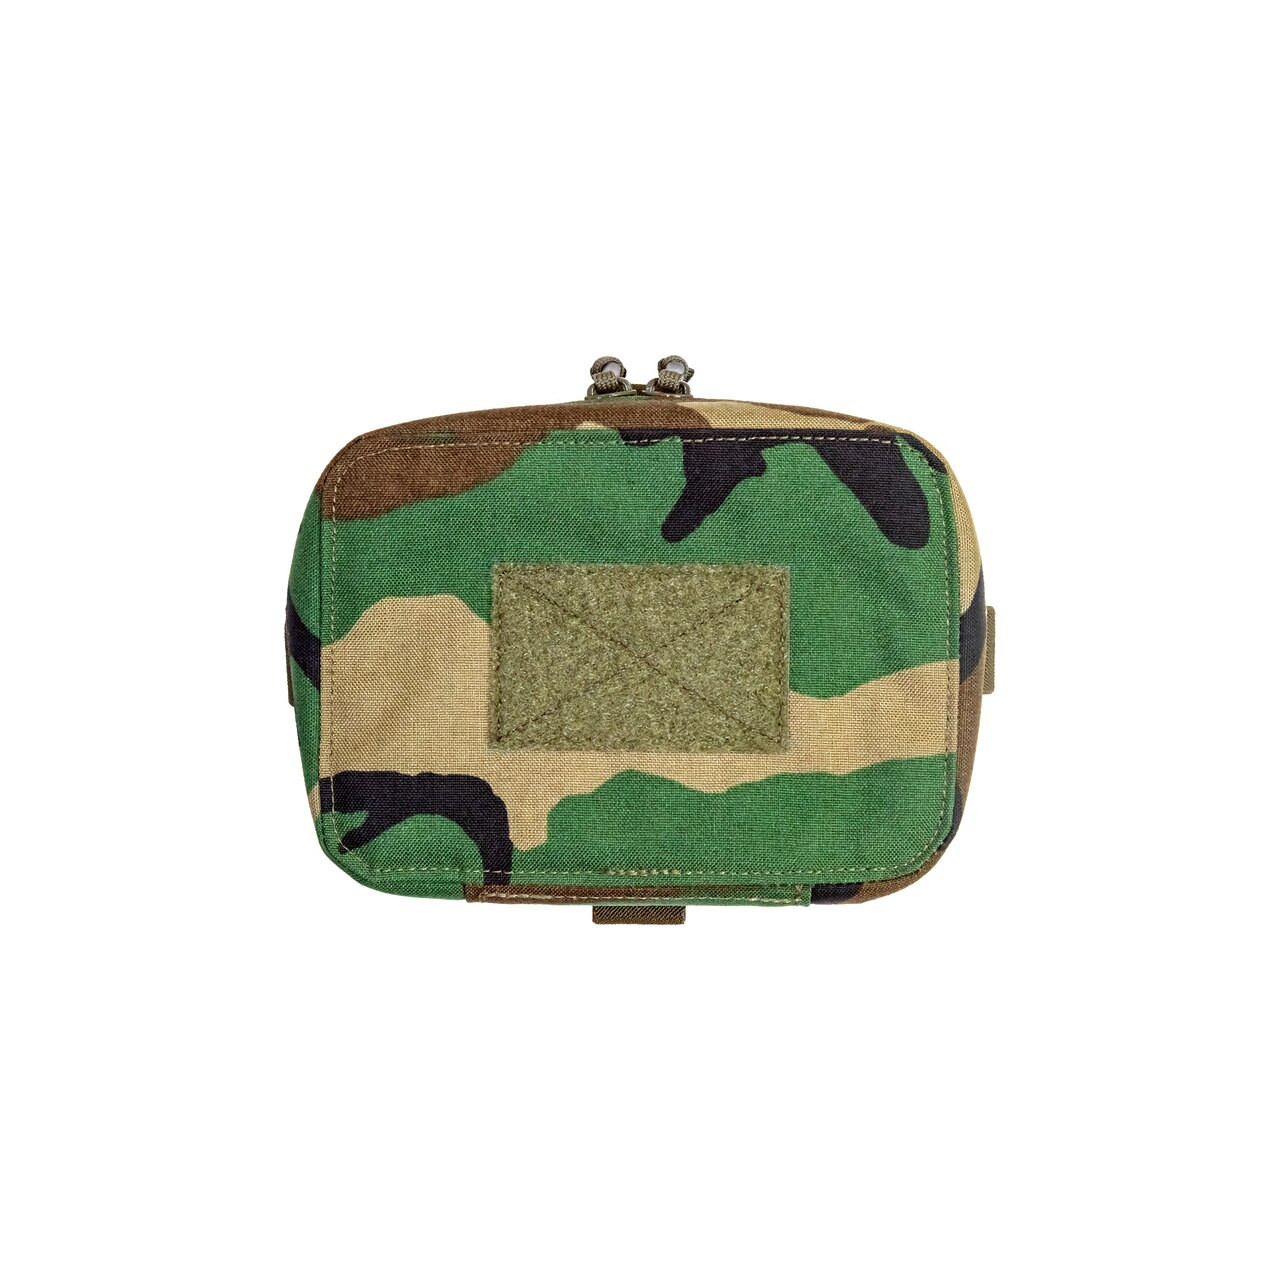  WOLF TACTICAL Fanny Pack, Dangler Pouch Concealed